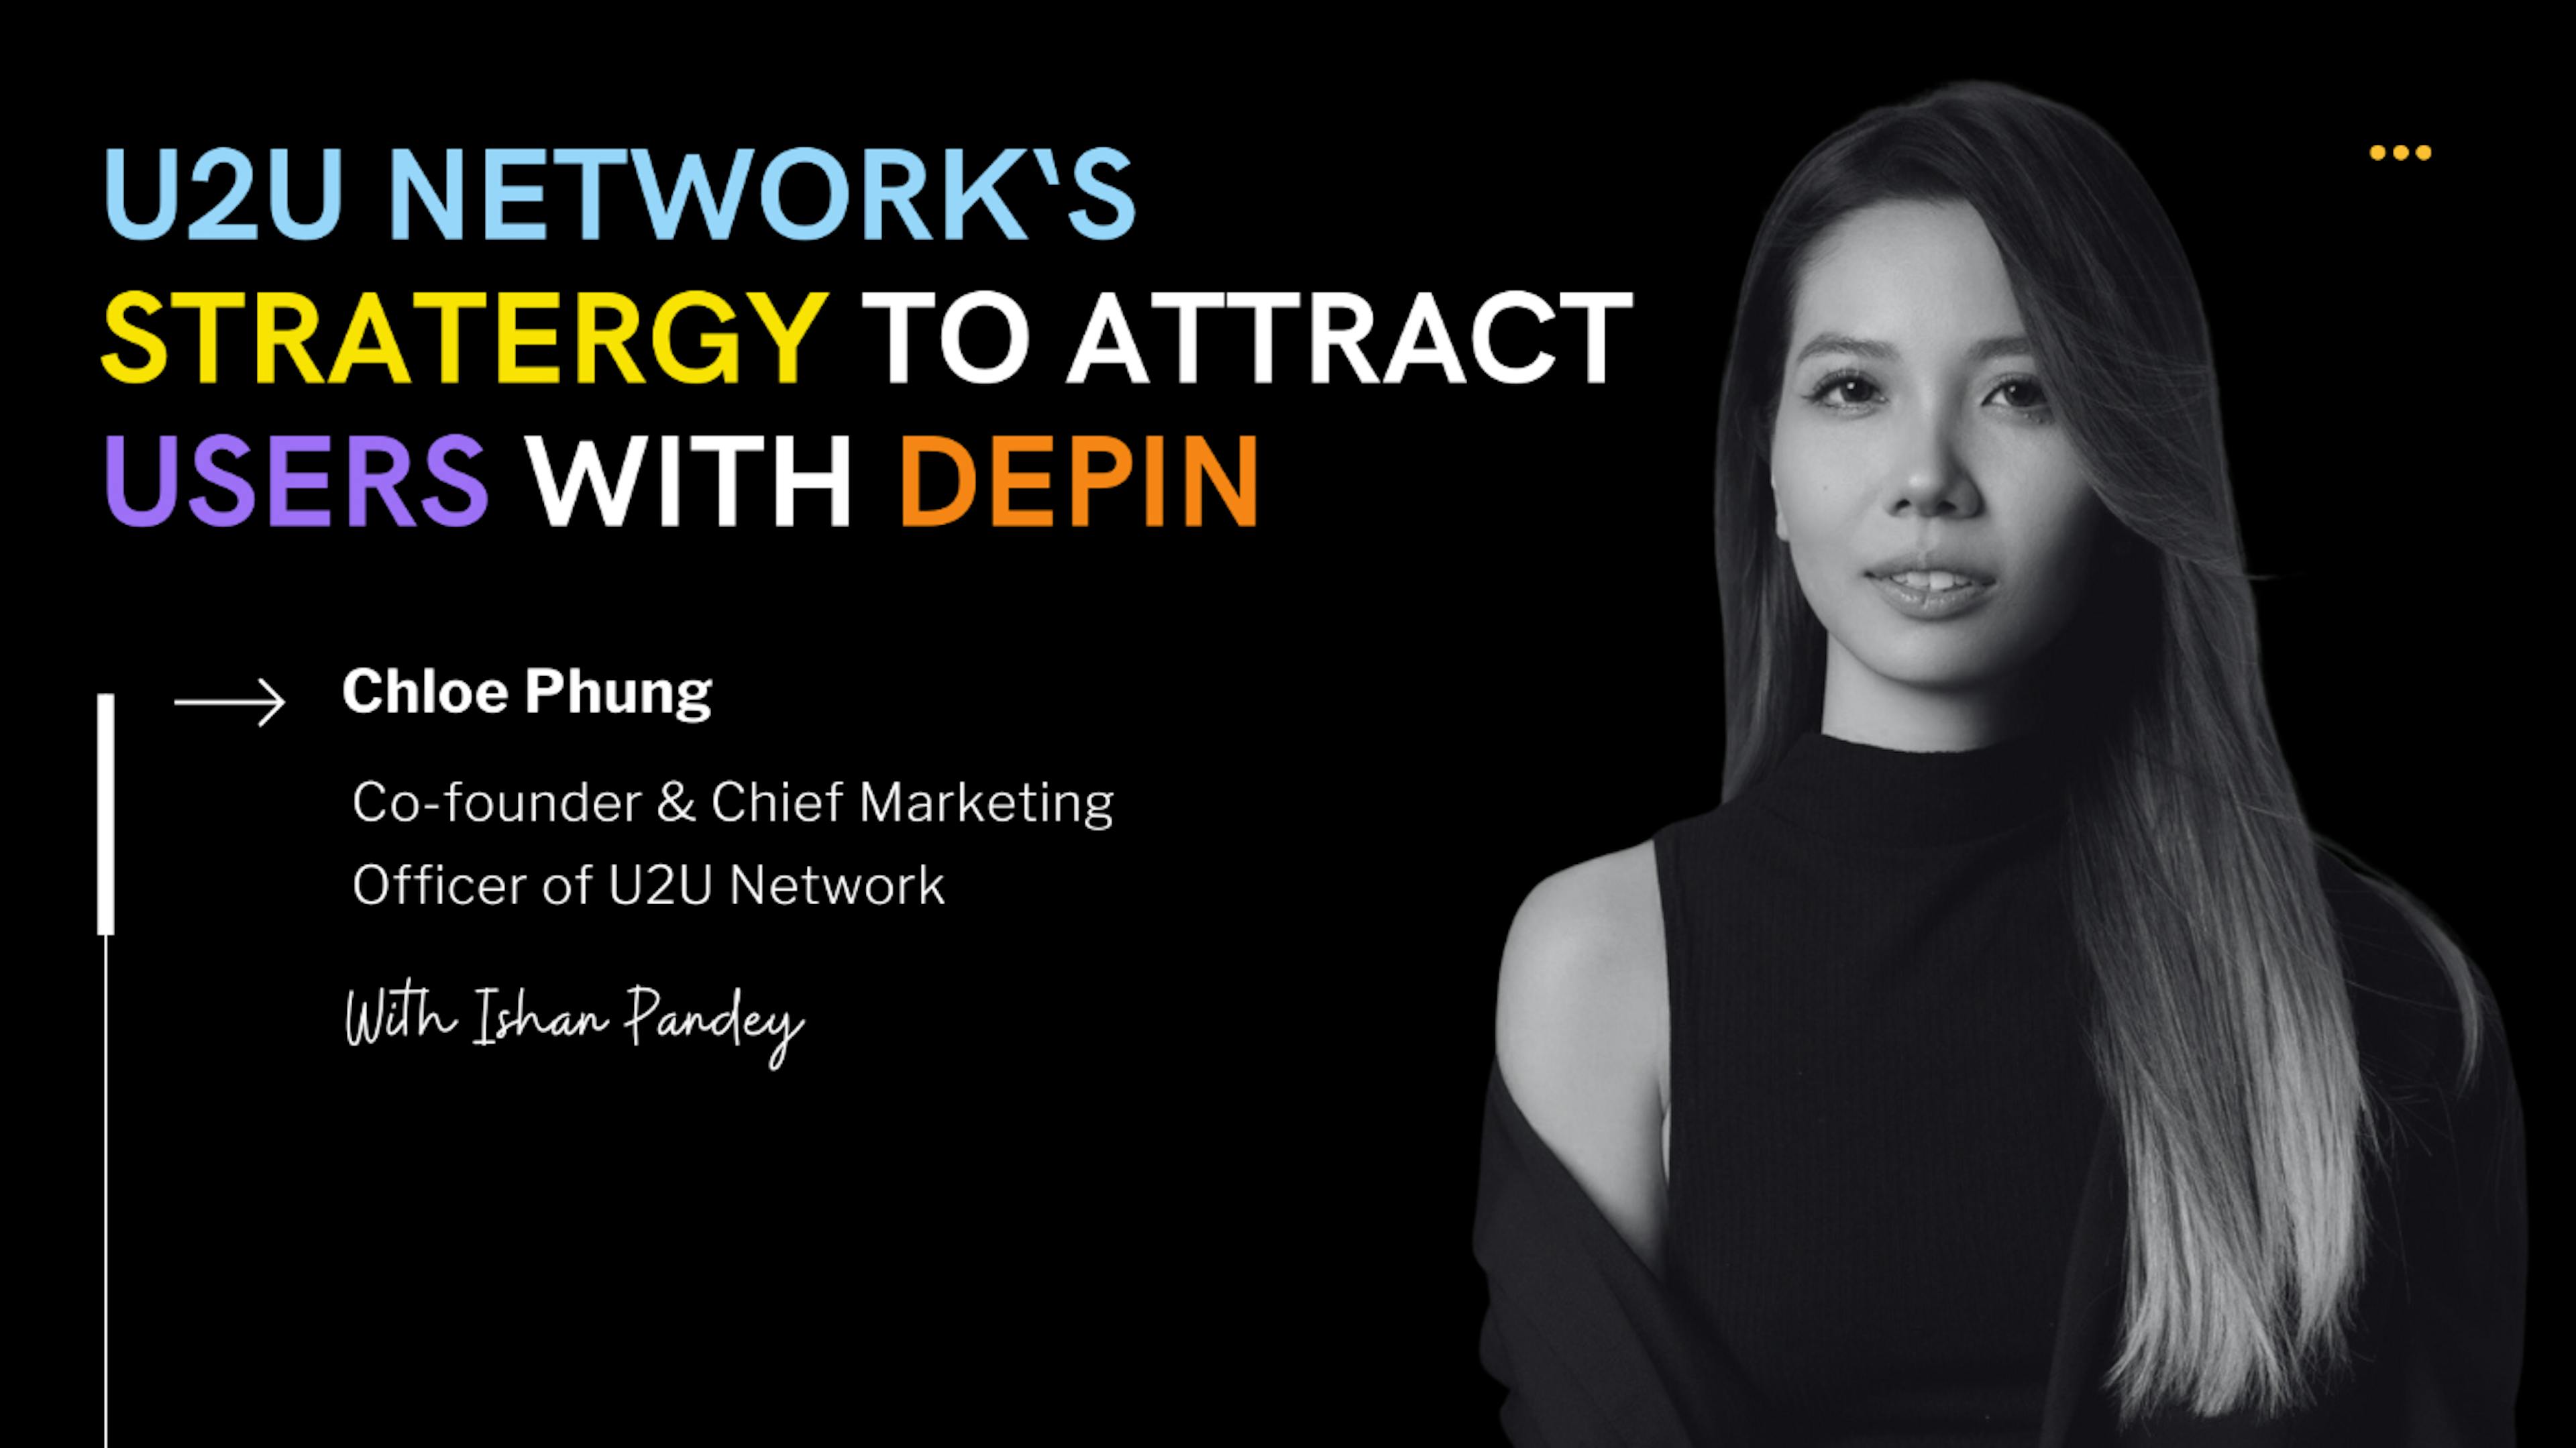 featured image - How Chain Capital Backed U2U Network Plans to Attract Users to Web3 with DePIN